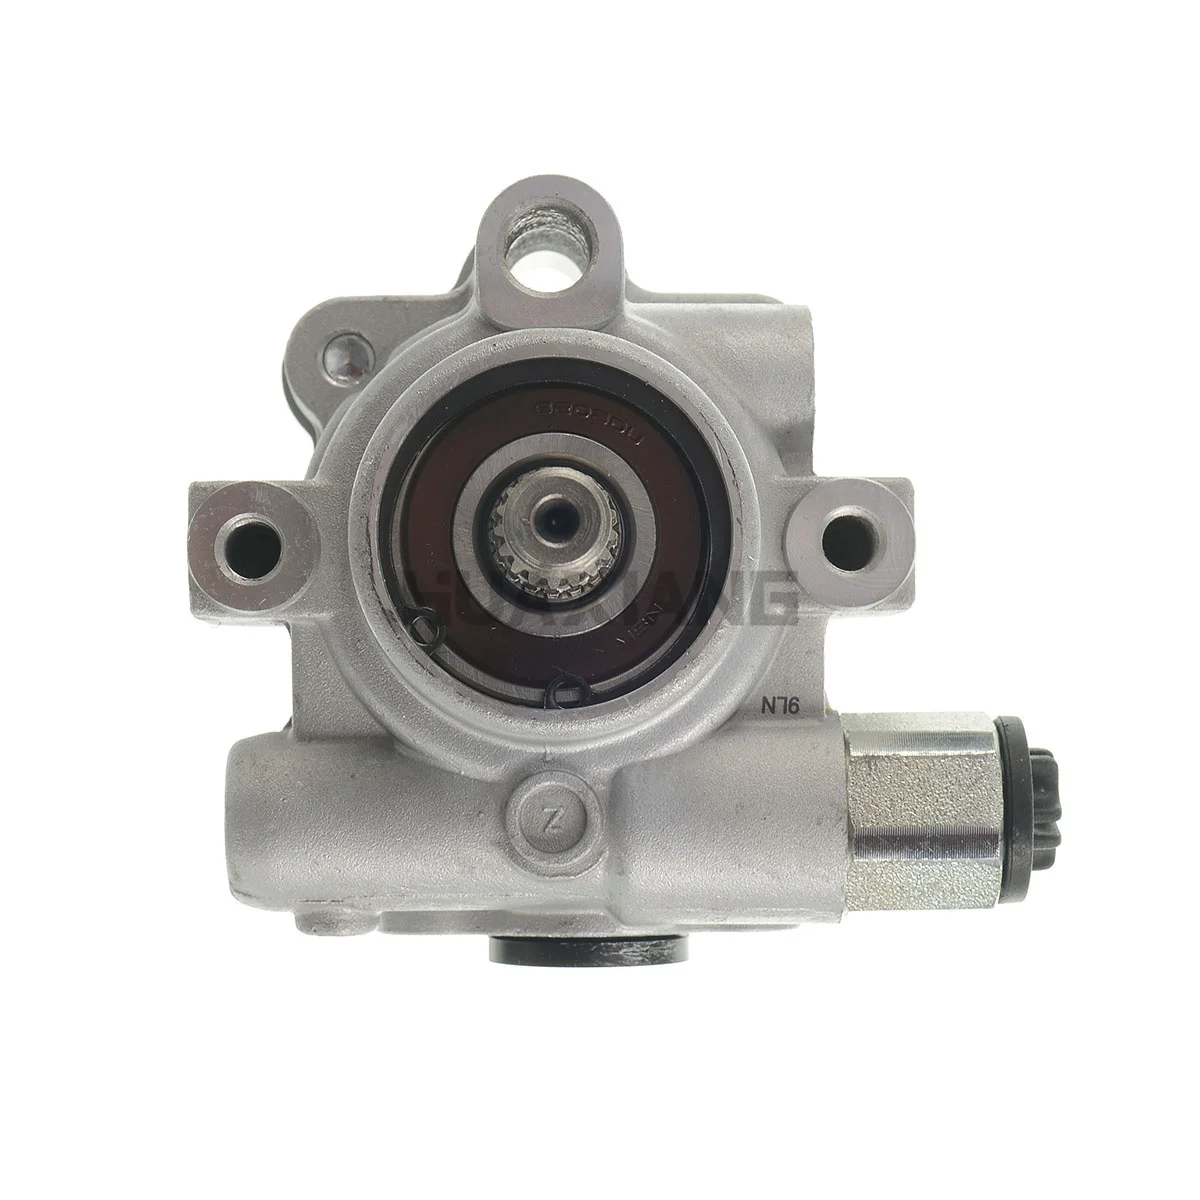 

CN US CA Power Steering Pump without Pulley for Subaru Impreza Legacy H4 2.2L 2.5L 34411AA432 34411AA431